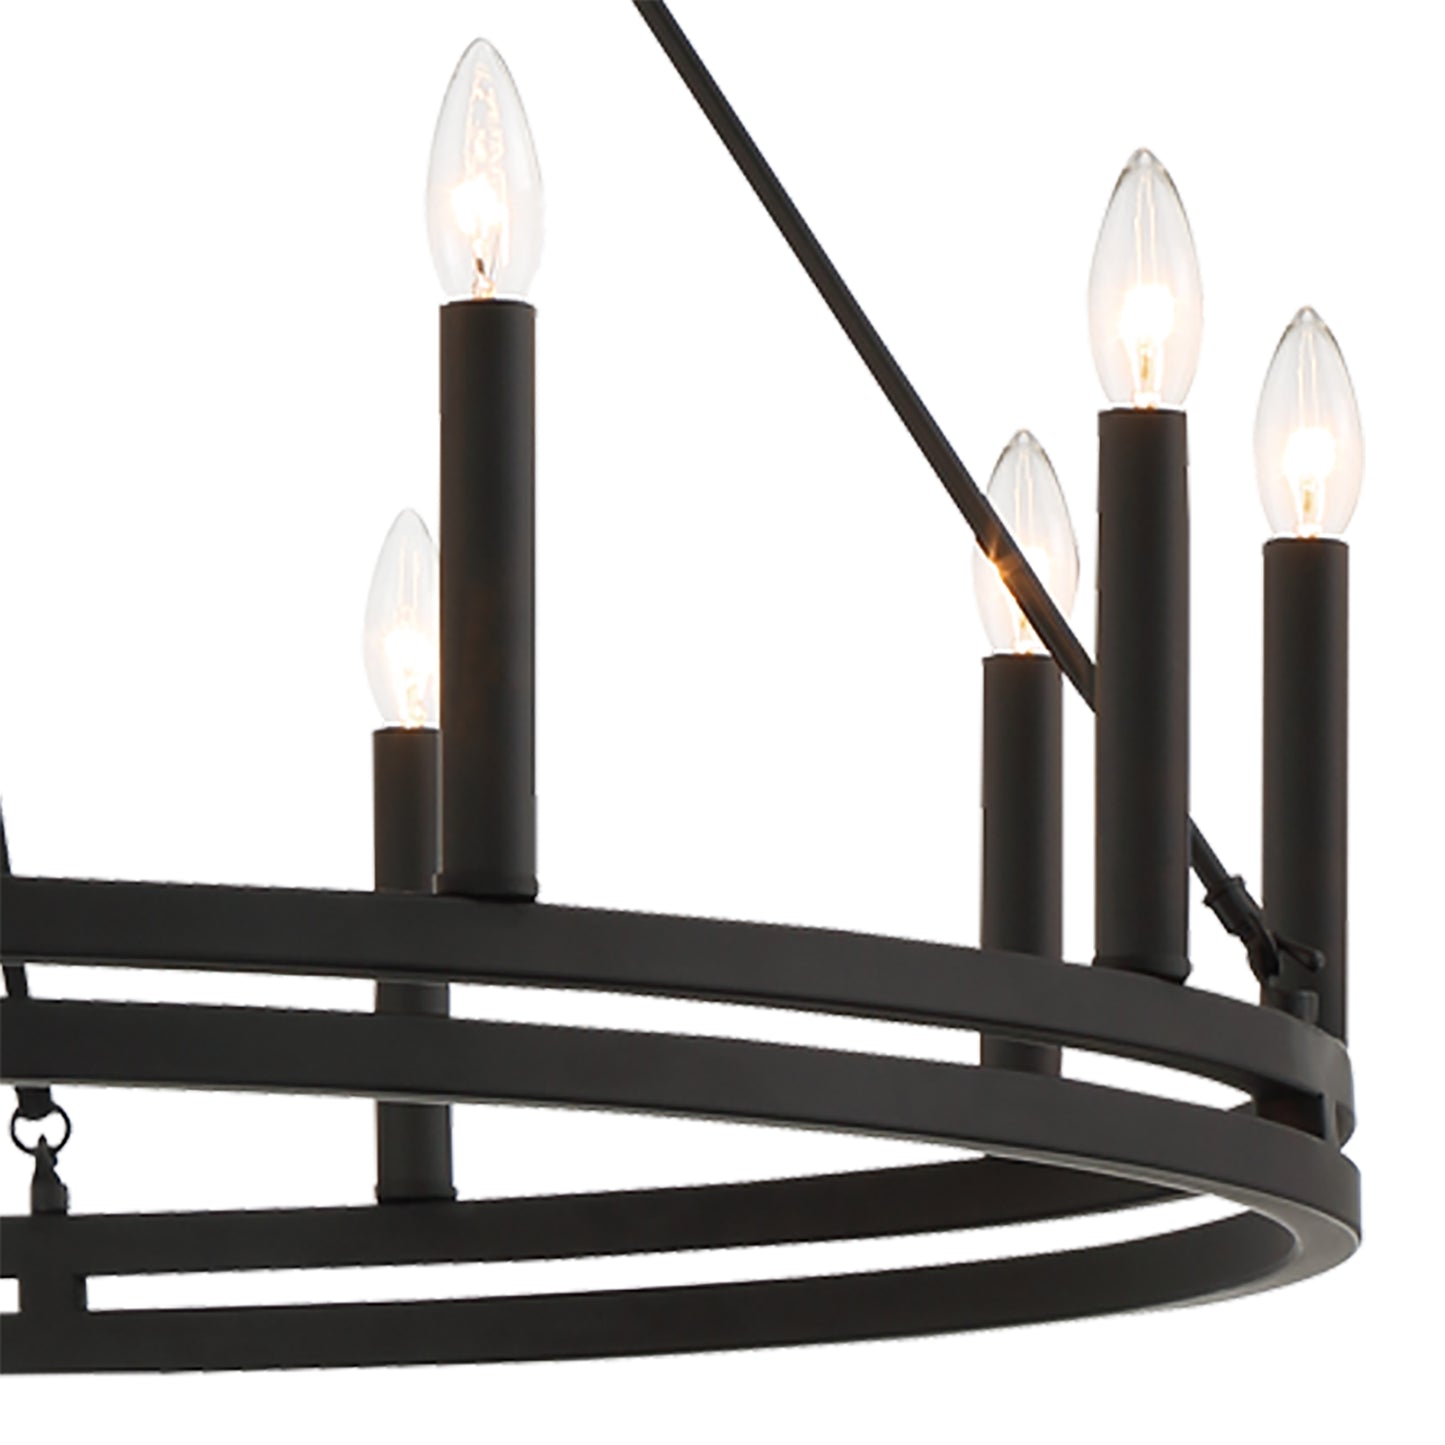 12-Light Traditional Candle Style Wagon Wheel Chandelier UL Listed